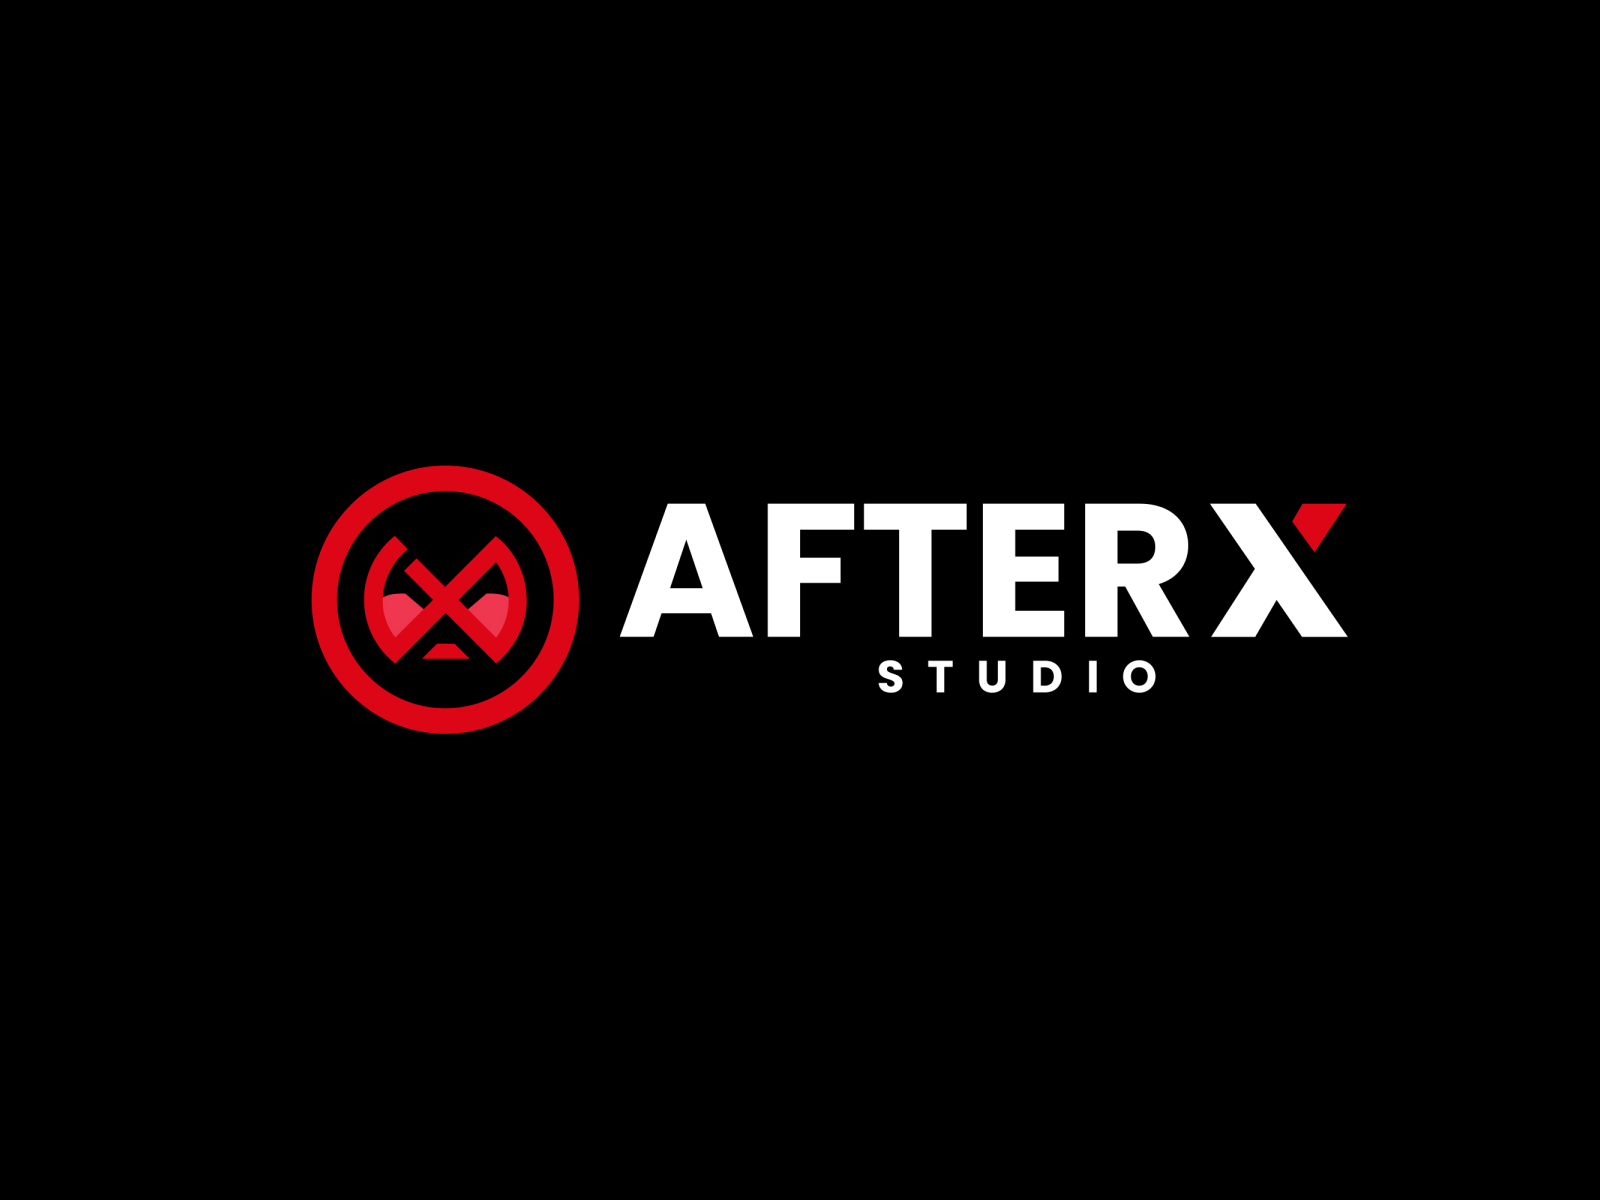 Logo Design for a animation development company after X studio by ...